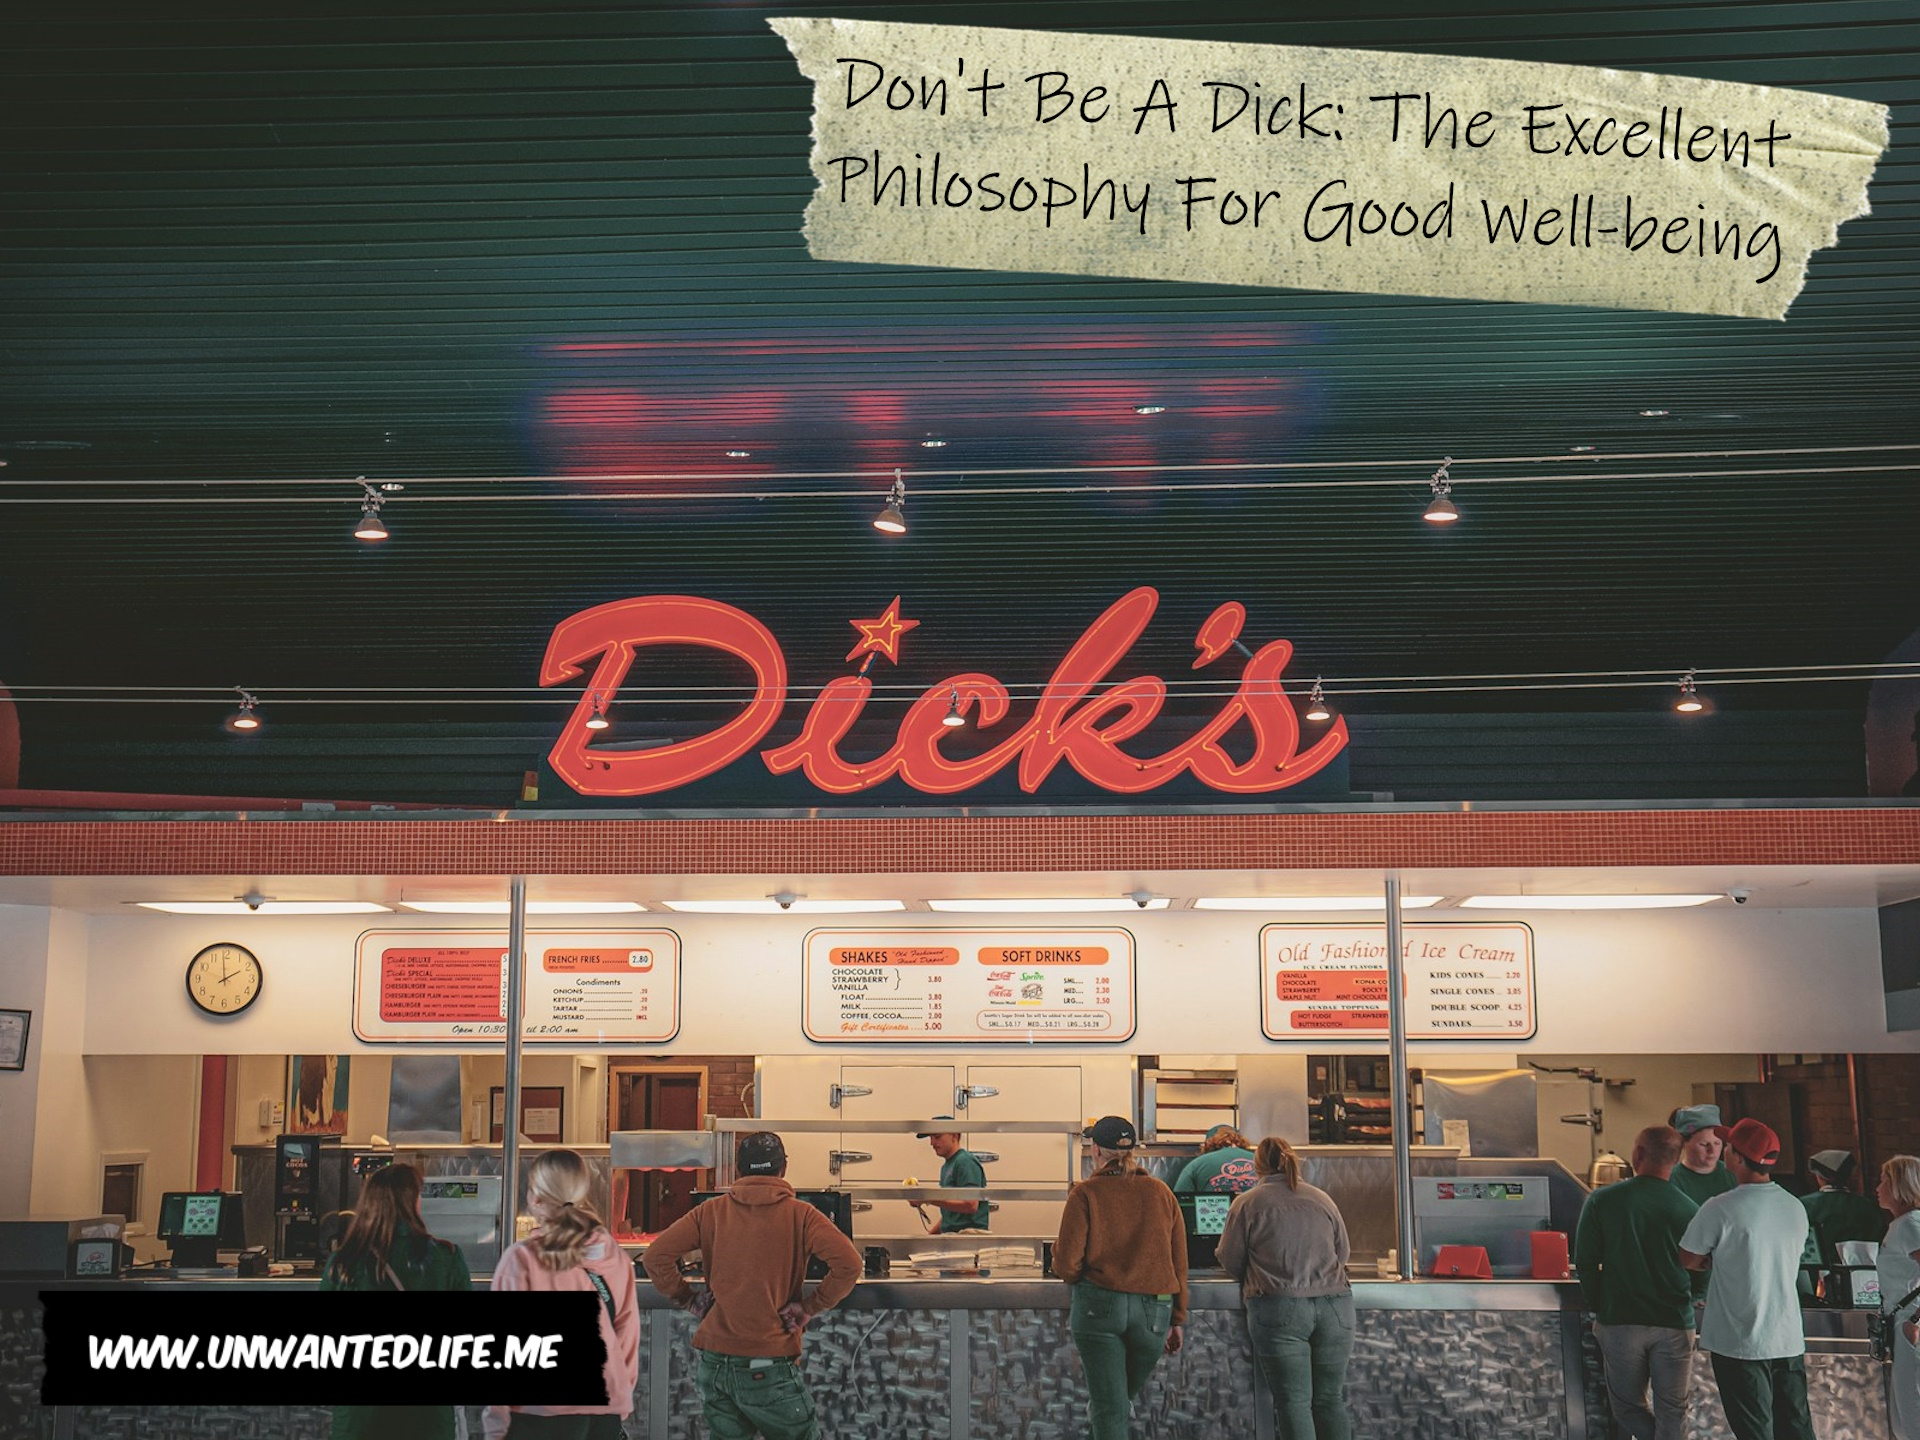 A photo of an American diner called Dick's to represent the topic of the article - Don't Be A Dick: The Excellent Philosophy For Good Well-being